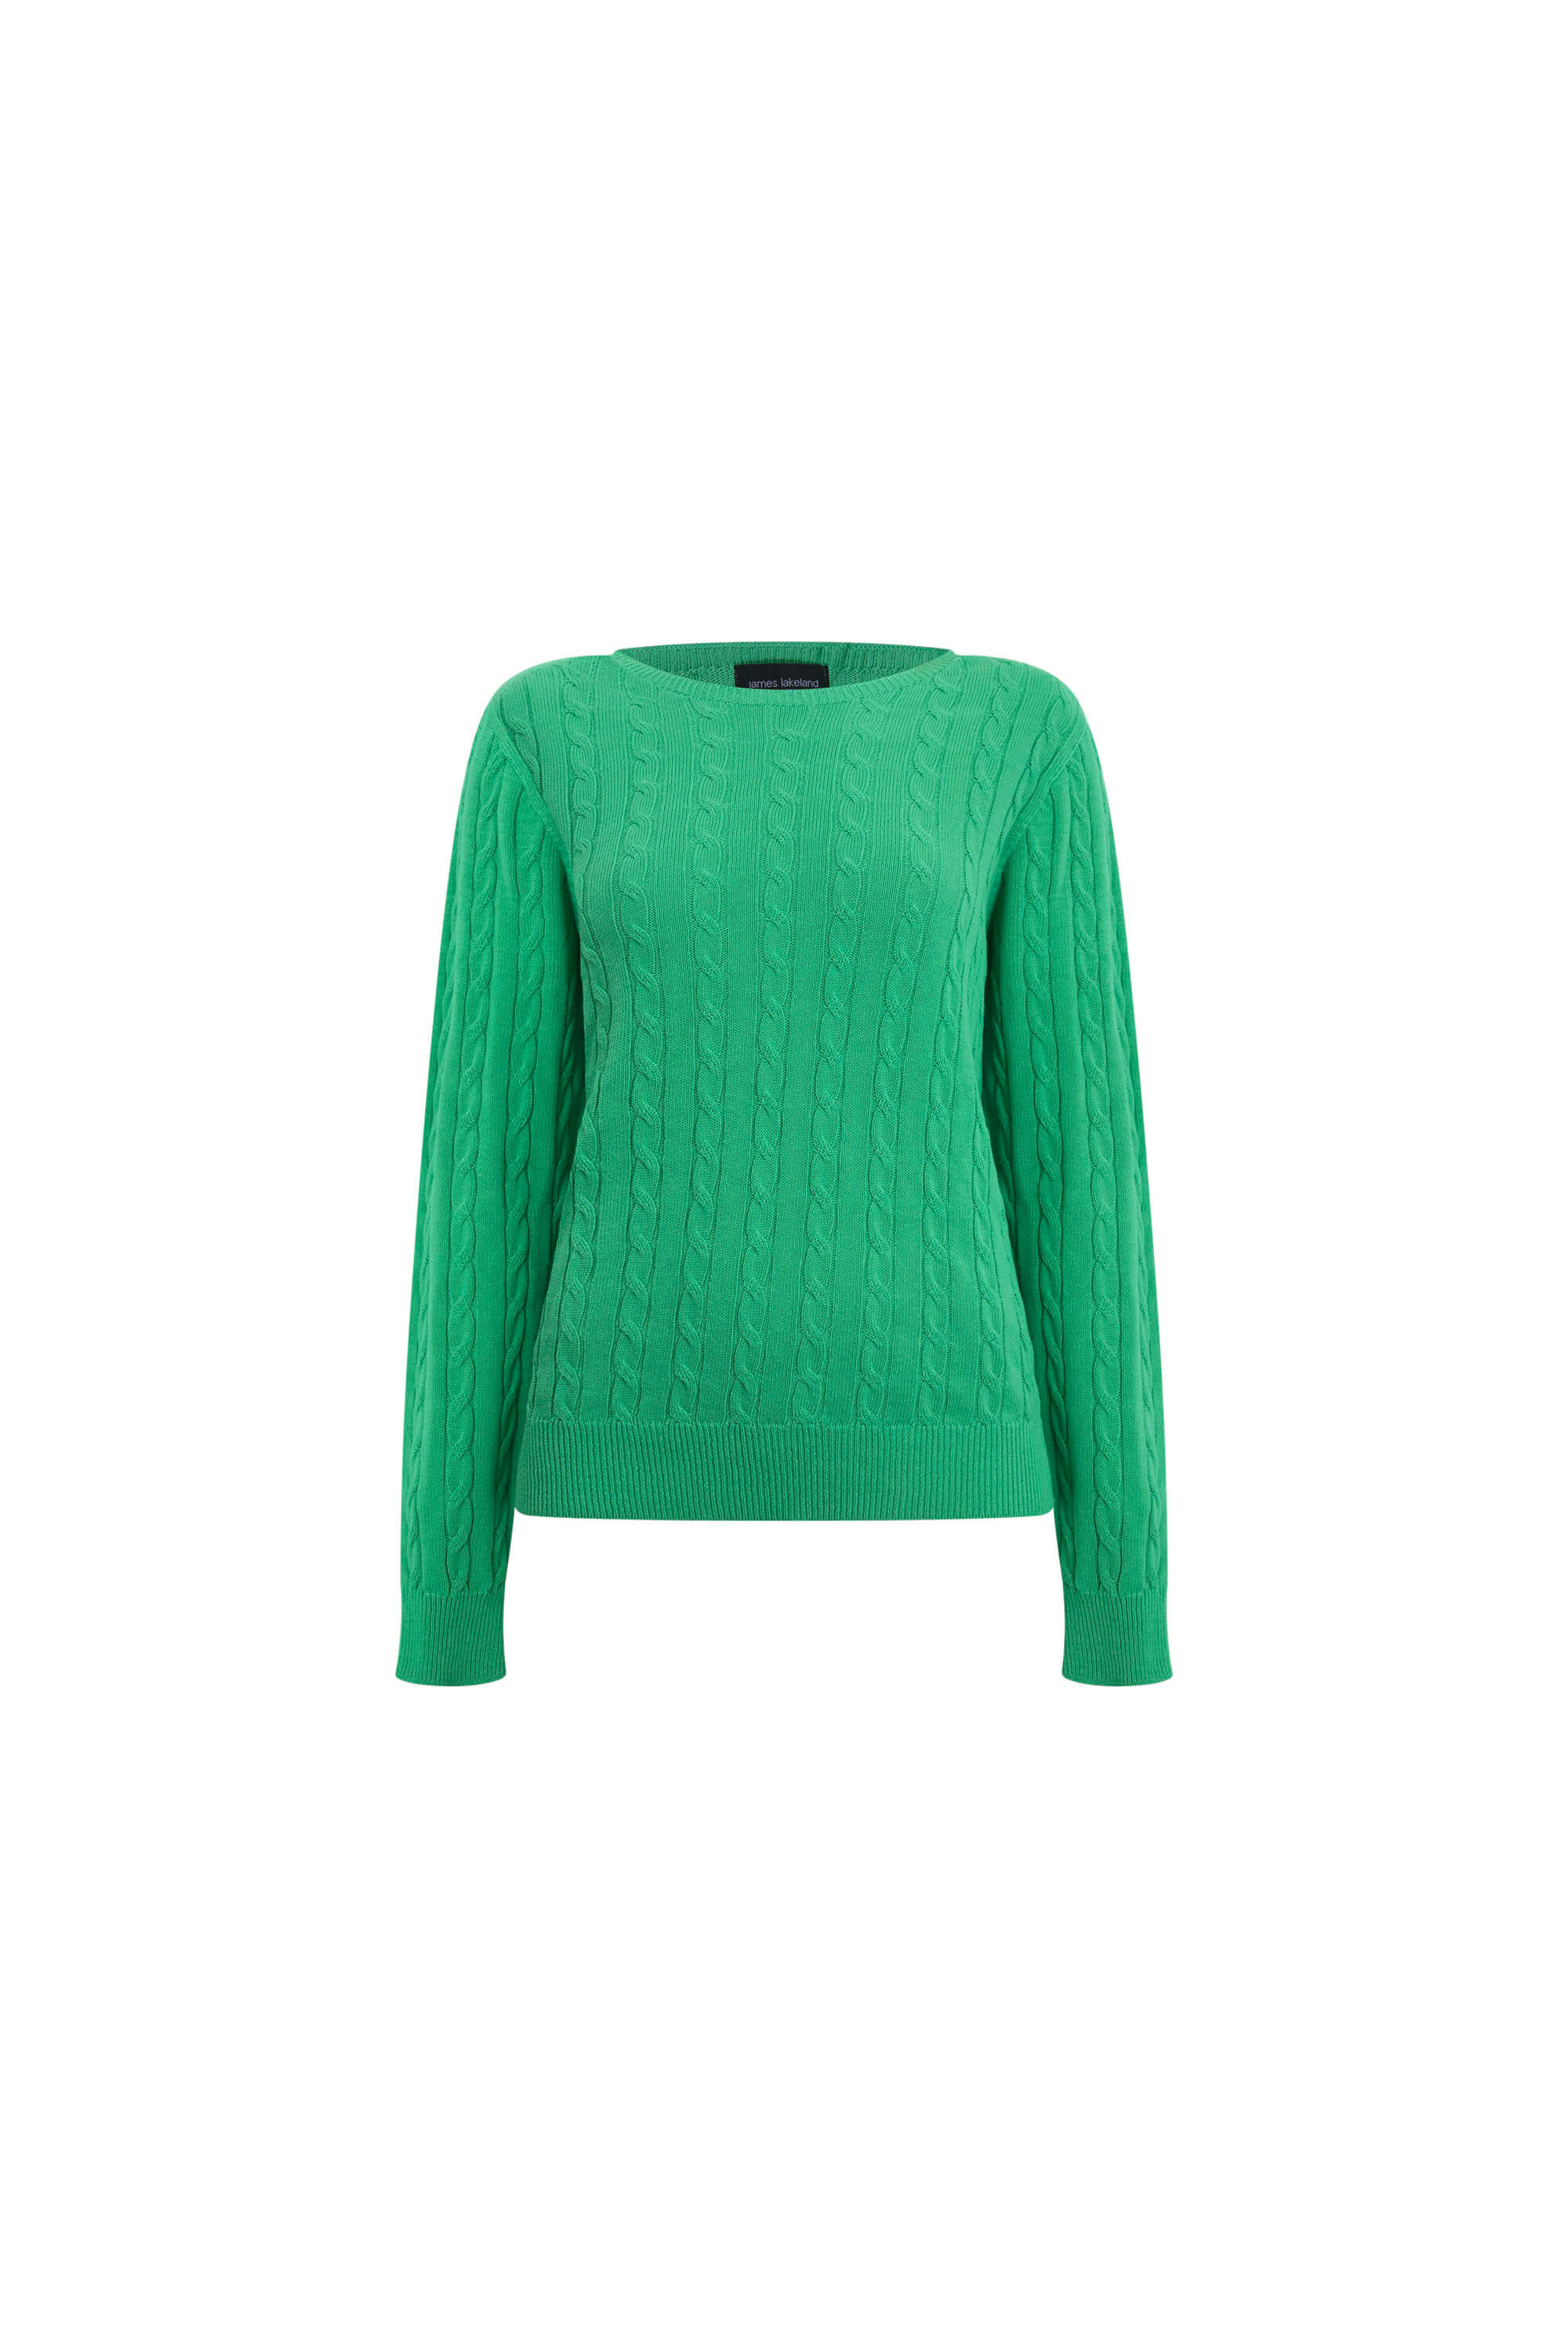 James Lakeland Women's Cable Knit Jumper Green